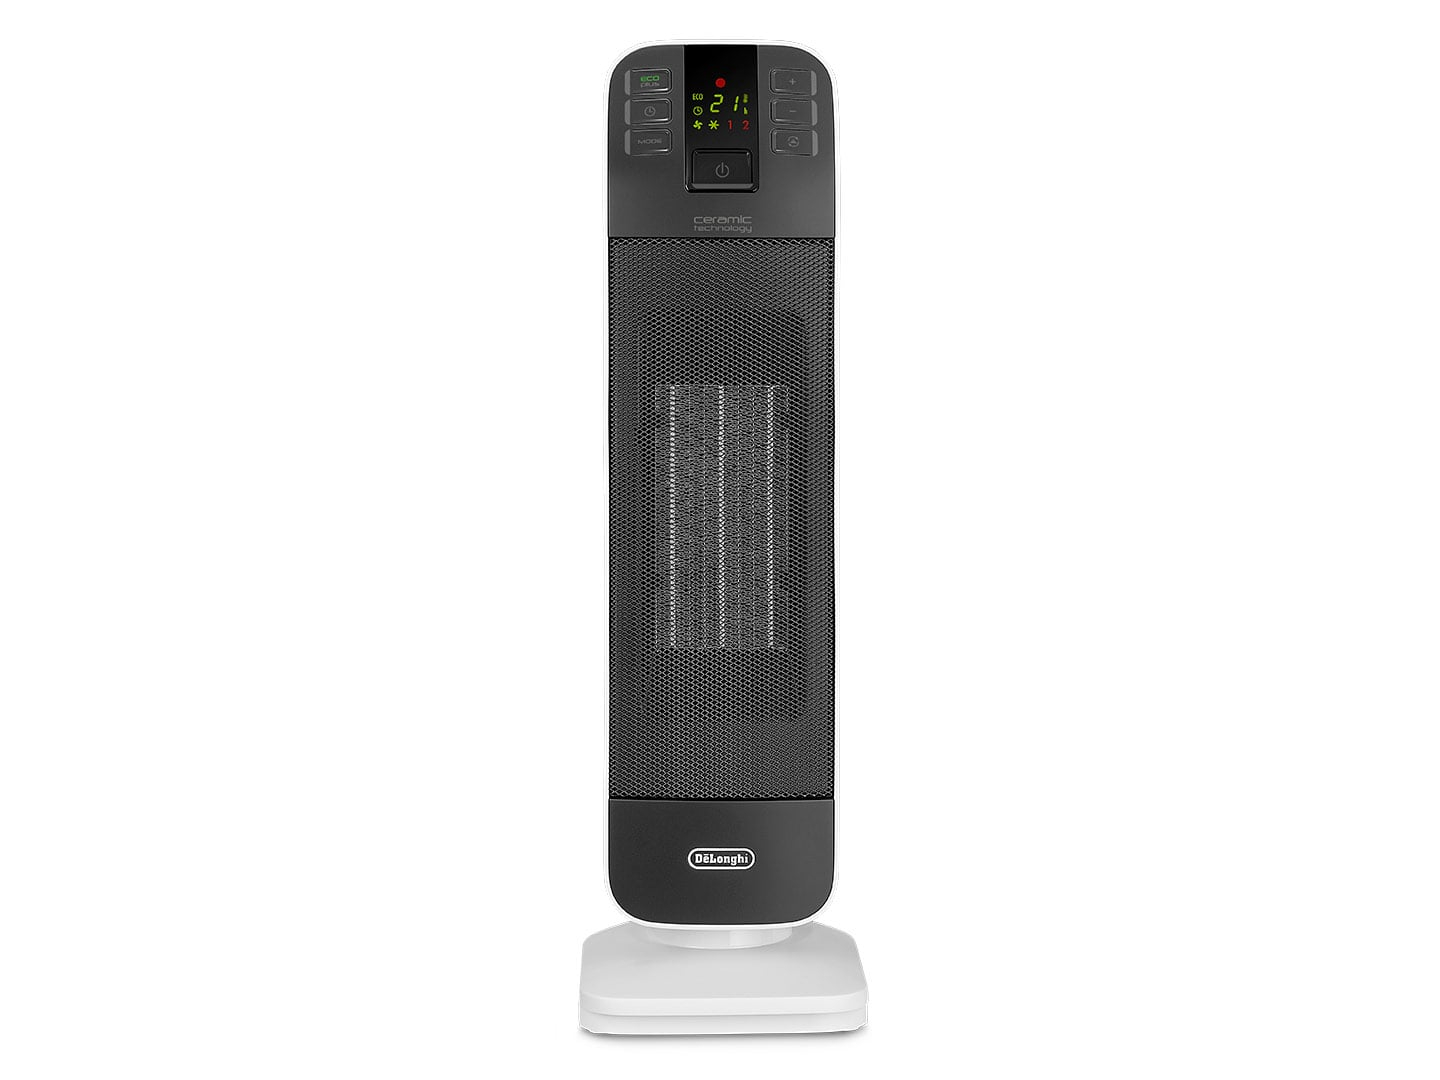 Hfx65v20 Ceramic Fan Heater Portable Heating Delonghi within proportions 1440 X 1080